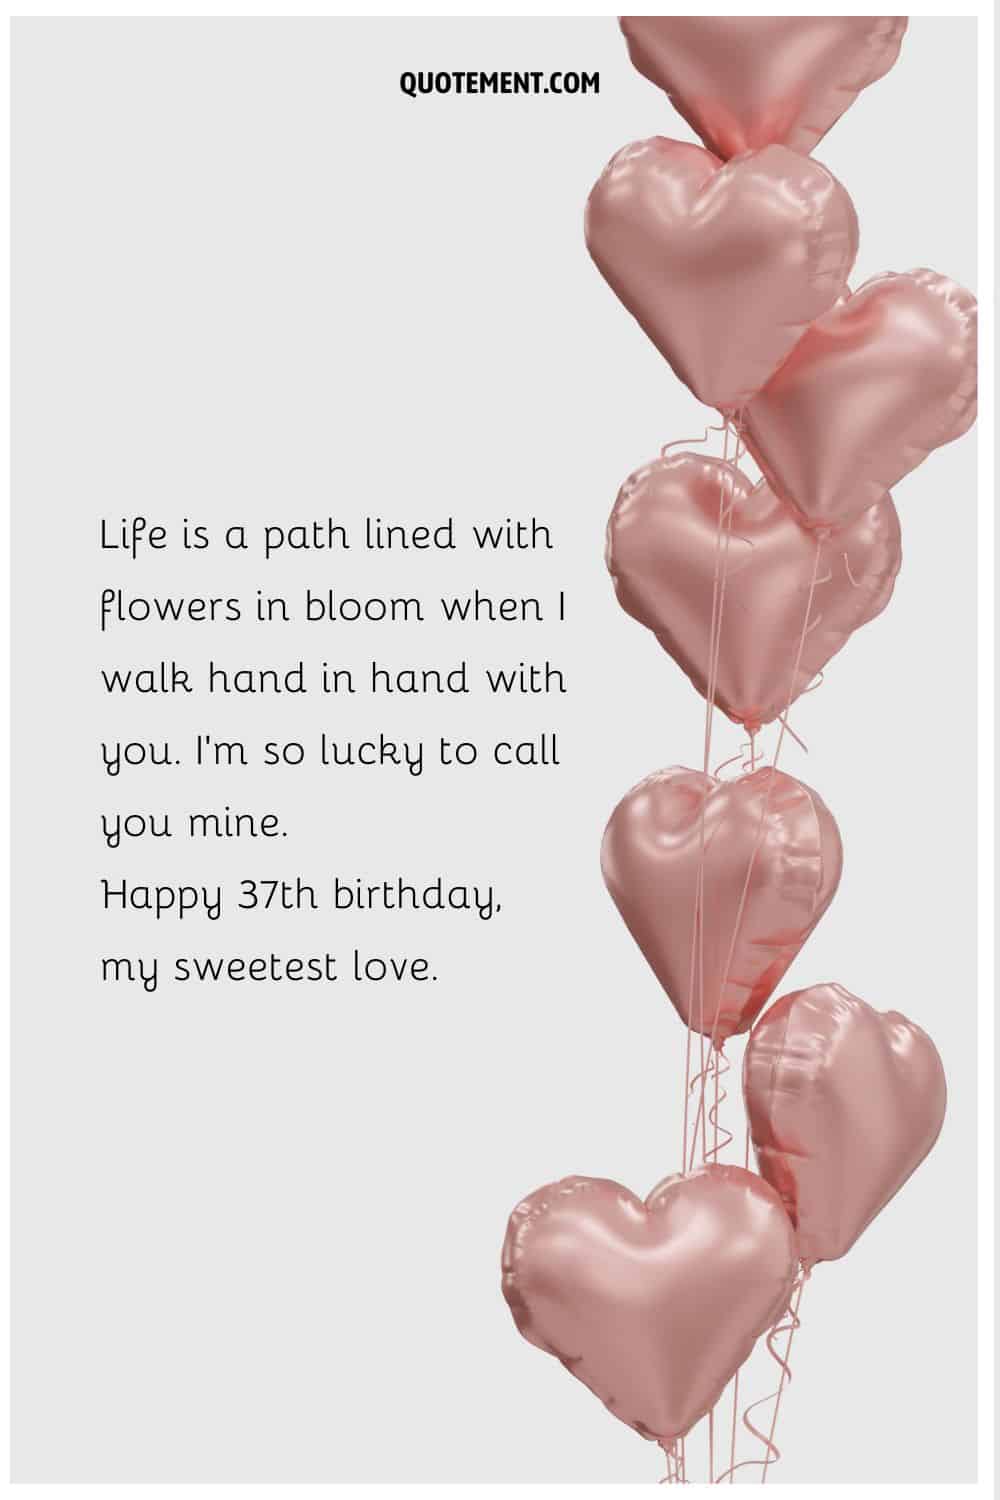 Romantic message for a wife's or girlfriend's 37th birthday and heart-shaped pink balloons.